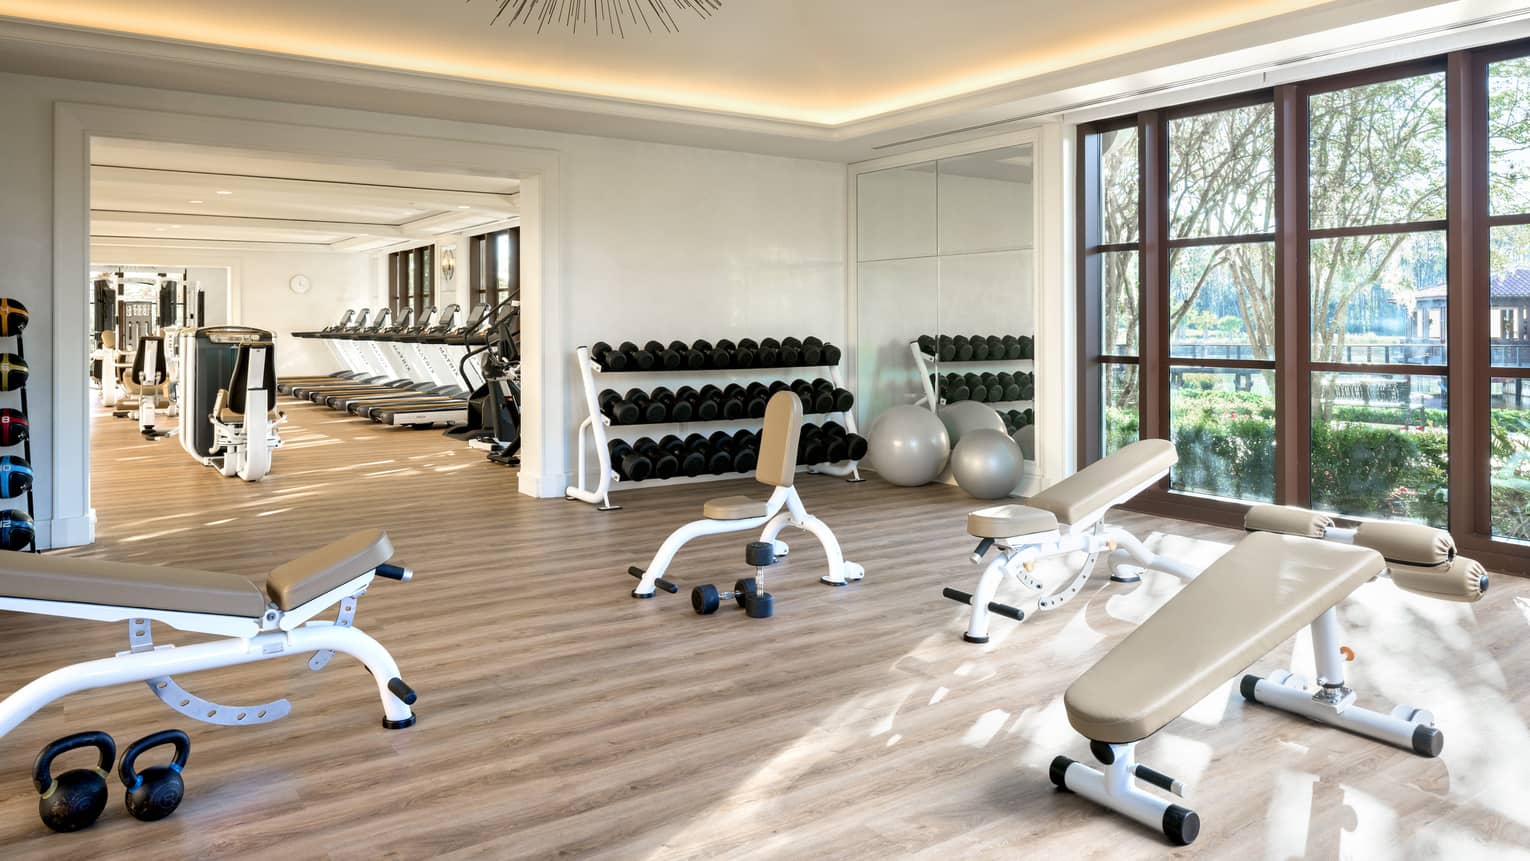 Bright Fitness Centre with leather benches, hand weights, large windows